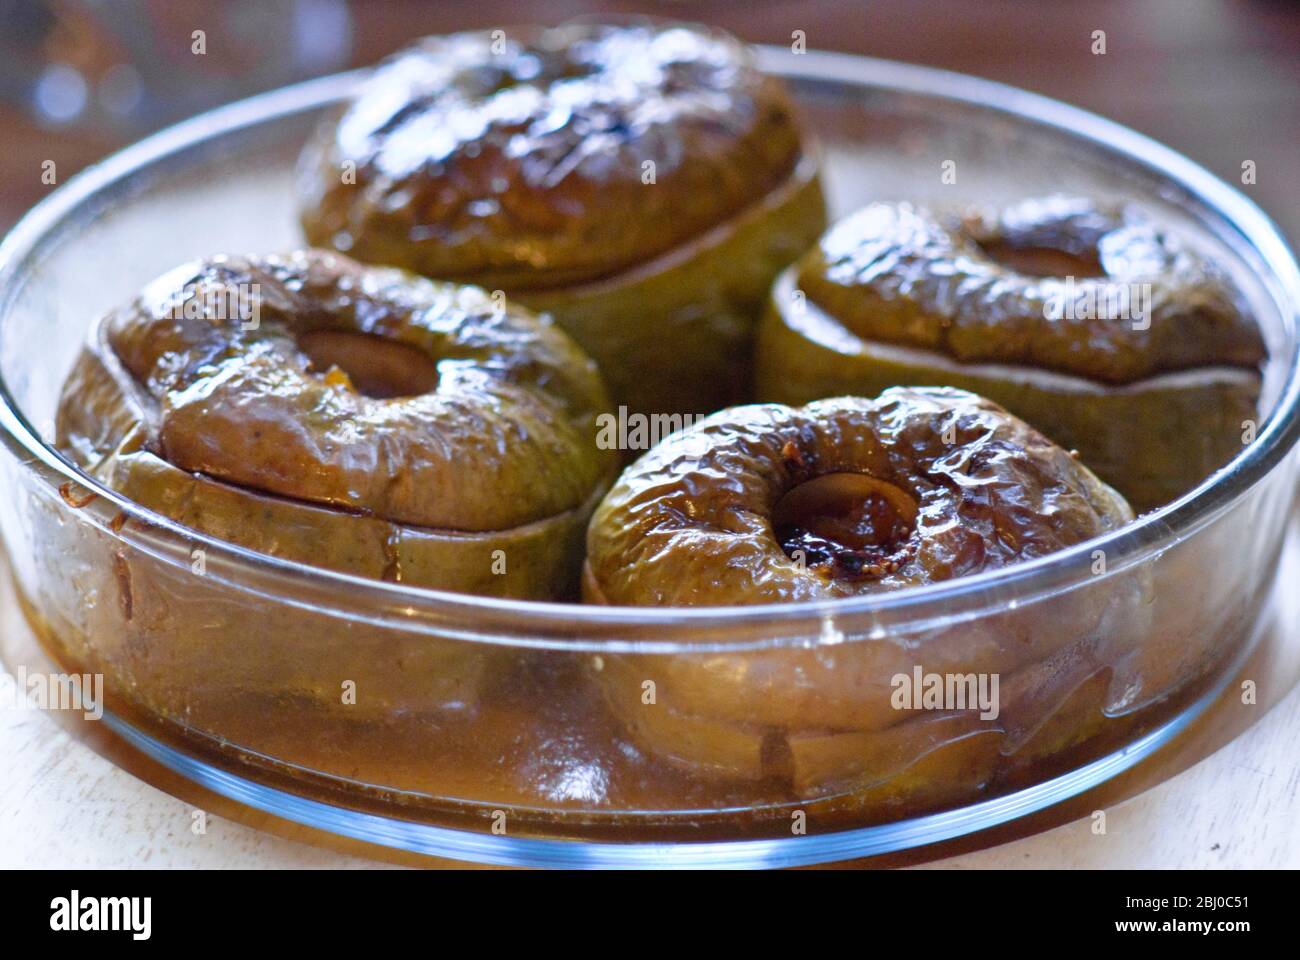 Four baked apples in glass dish - Stock Photo